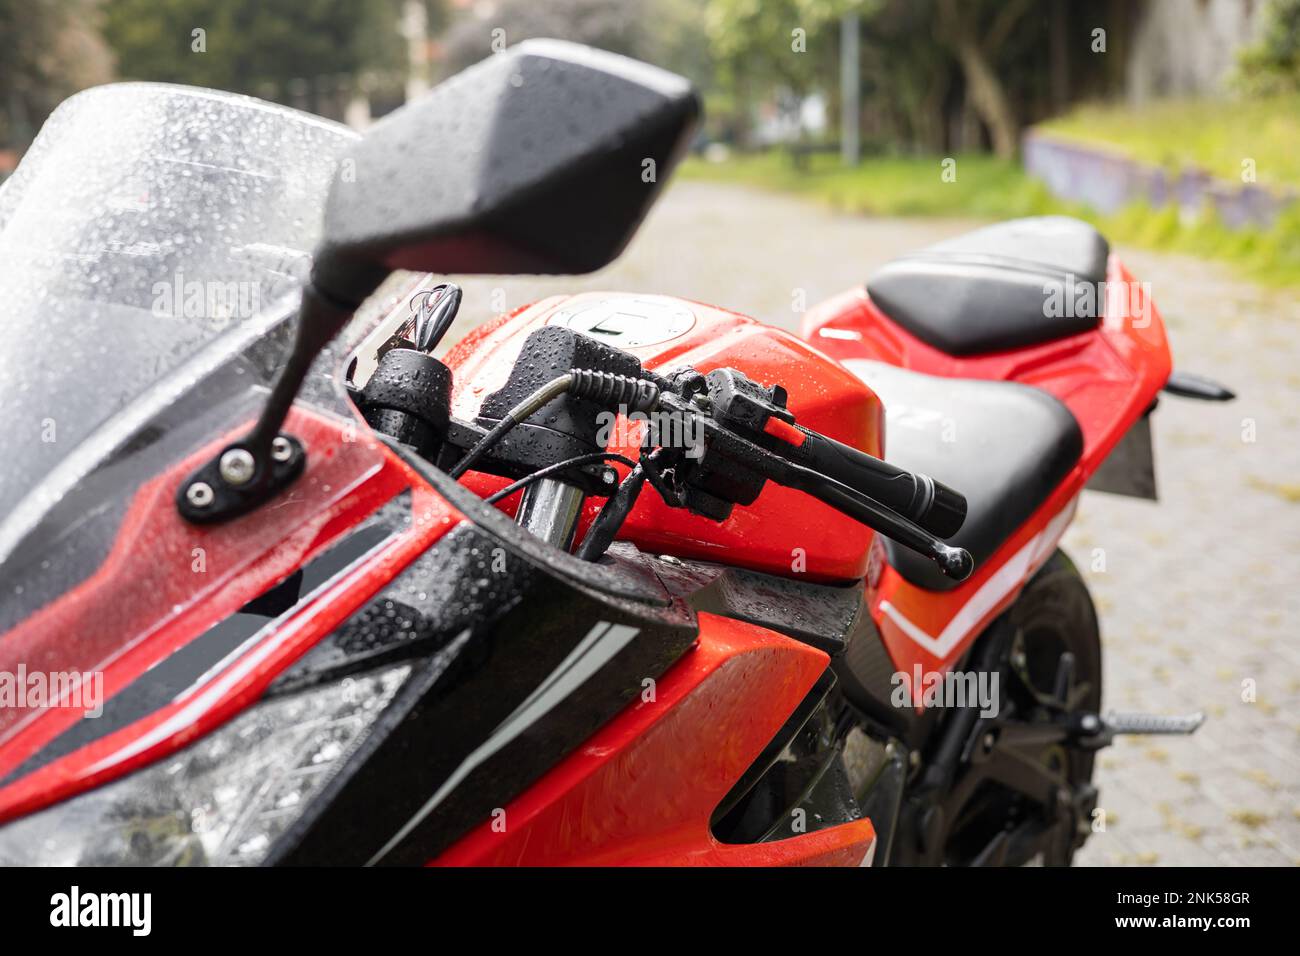 Sports motorcycle with steering wheel, rearview and tire, transport, tool Stock Photo